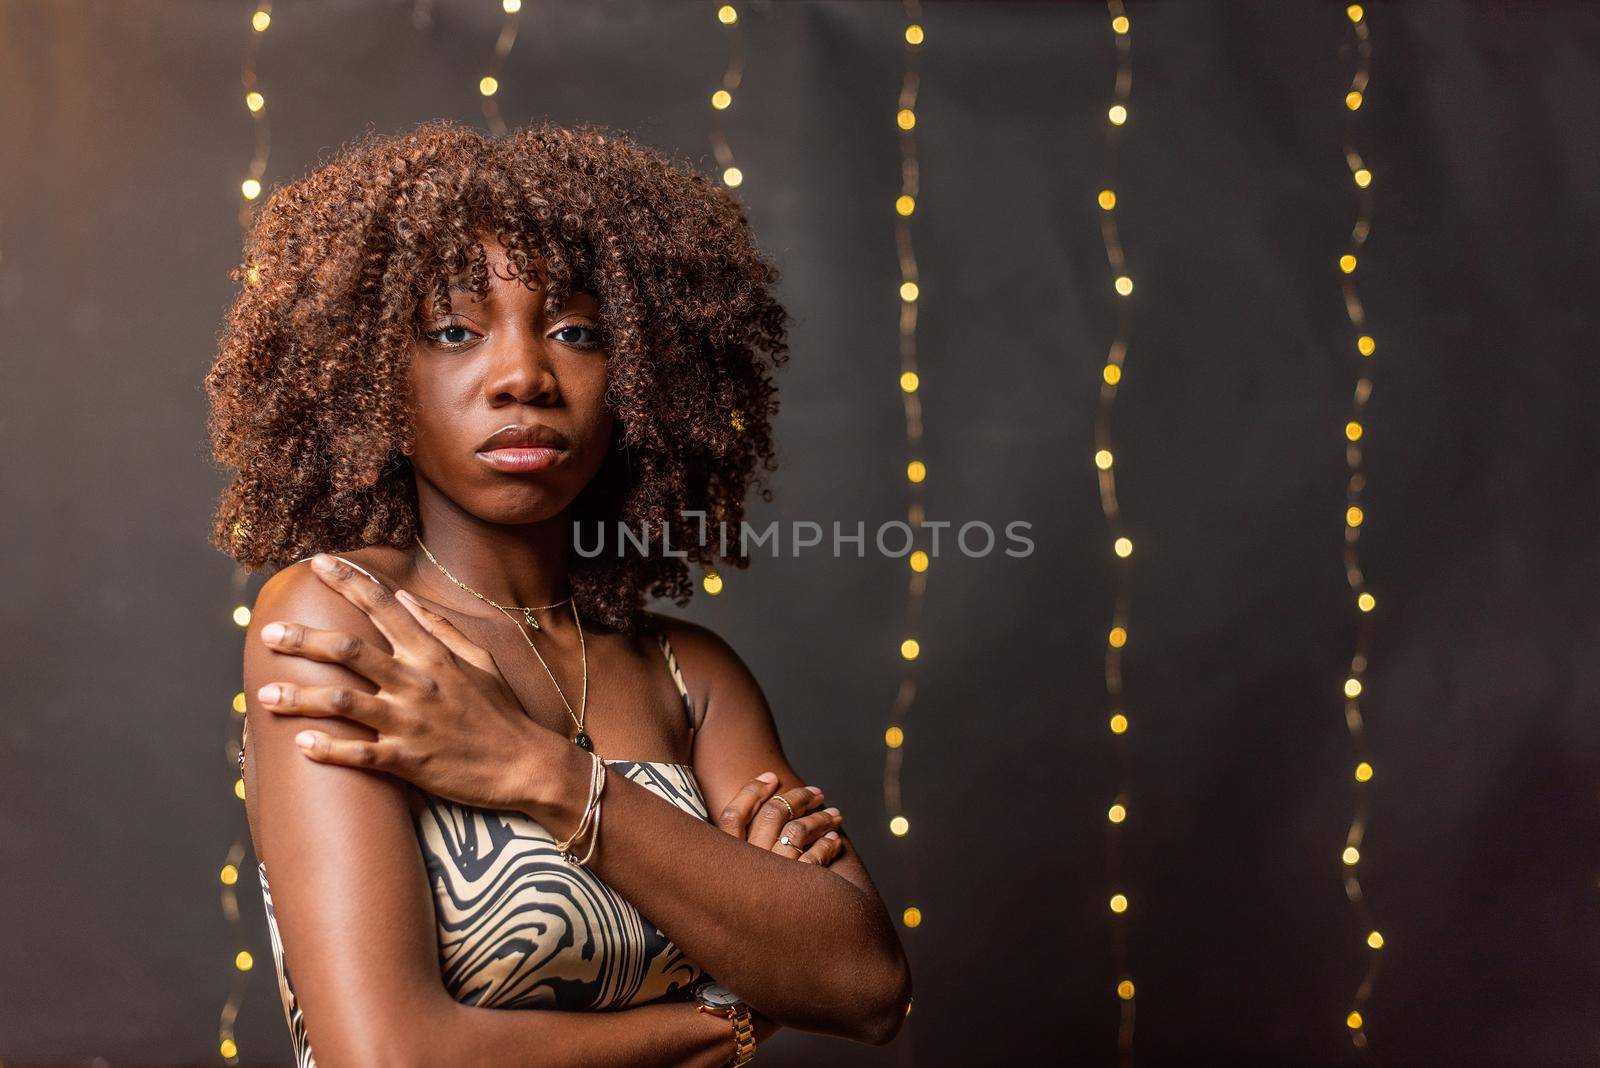 Unsmiling African American woman with curly hair looking at camera by ivanmoreno